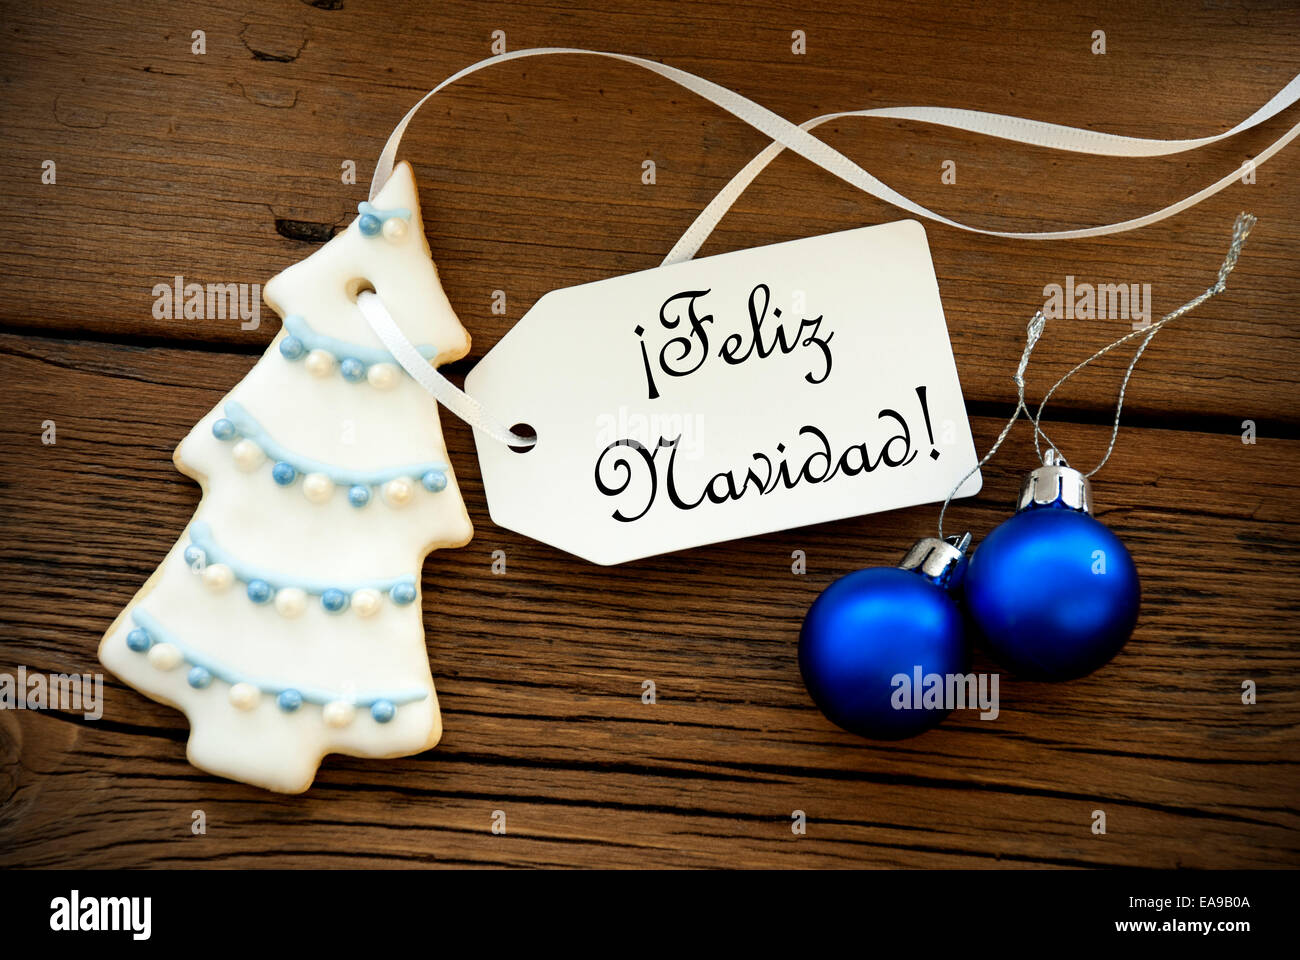 Christmas Background with the Spanish Words Feliz Navidad, which means Merry Christmas on a Label Stock Photo